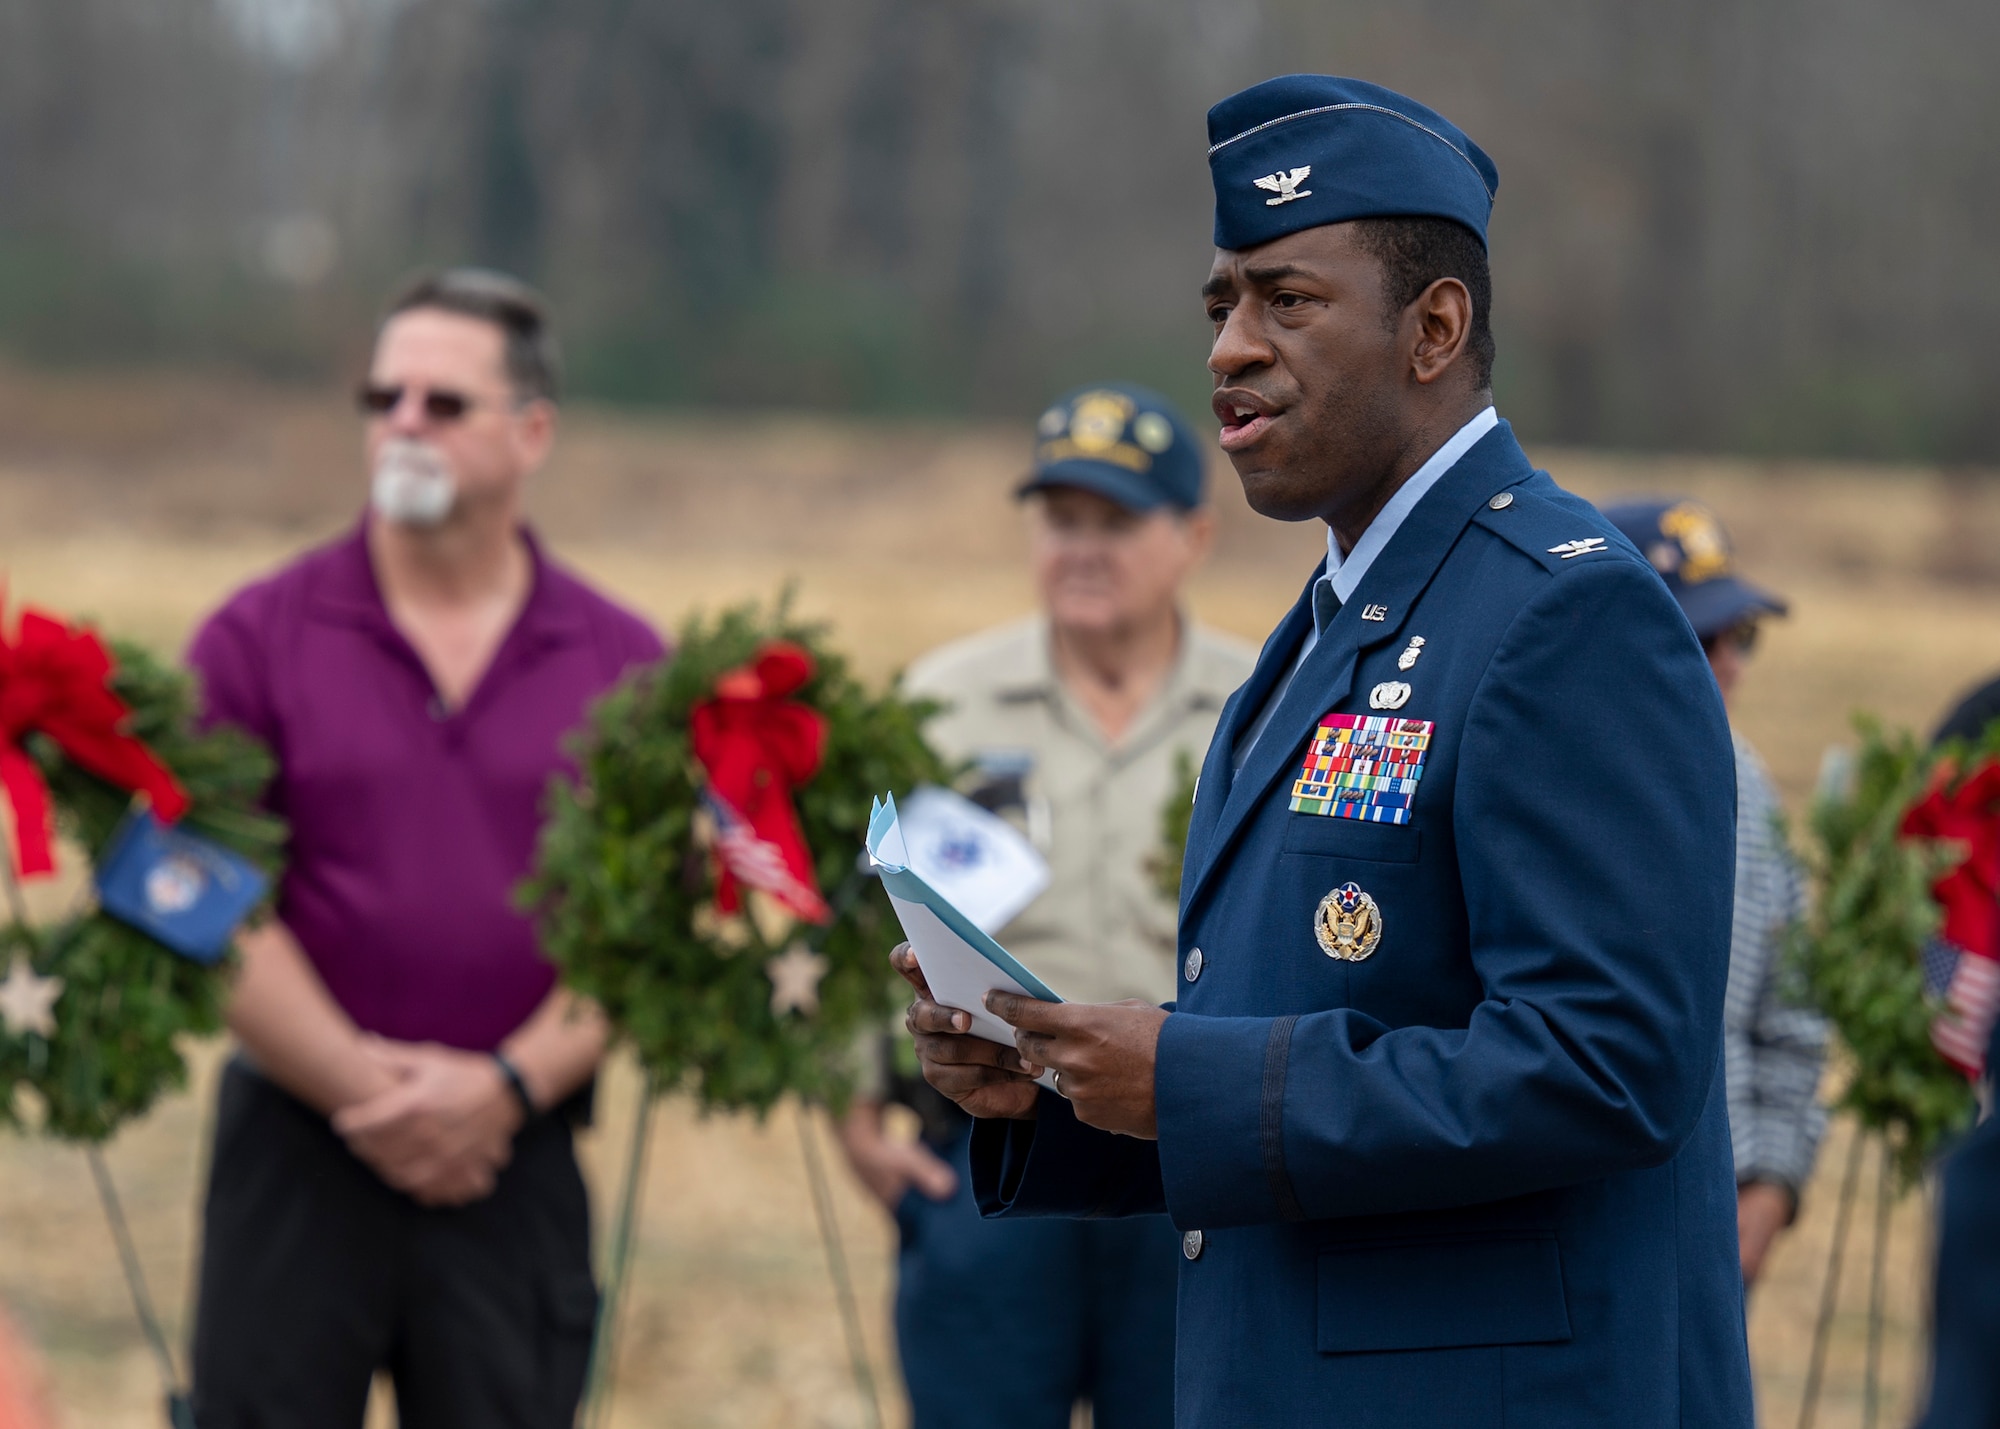 Col. Dolphis Hall, 4th Medical Group commander, speaks at a Wreaths Across America ceremony at the Pikeville Cemetery in Pikeville, North Carolina, Dec. 19, 2021.